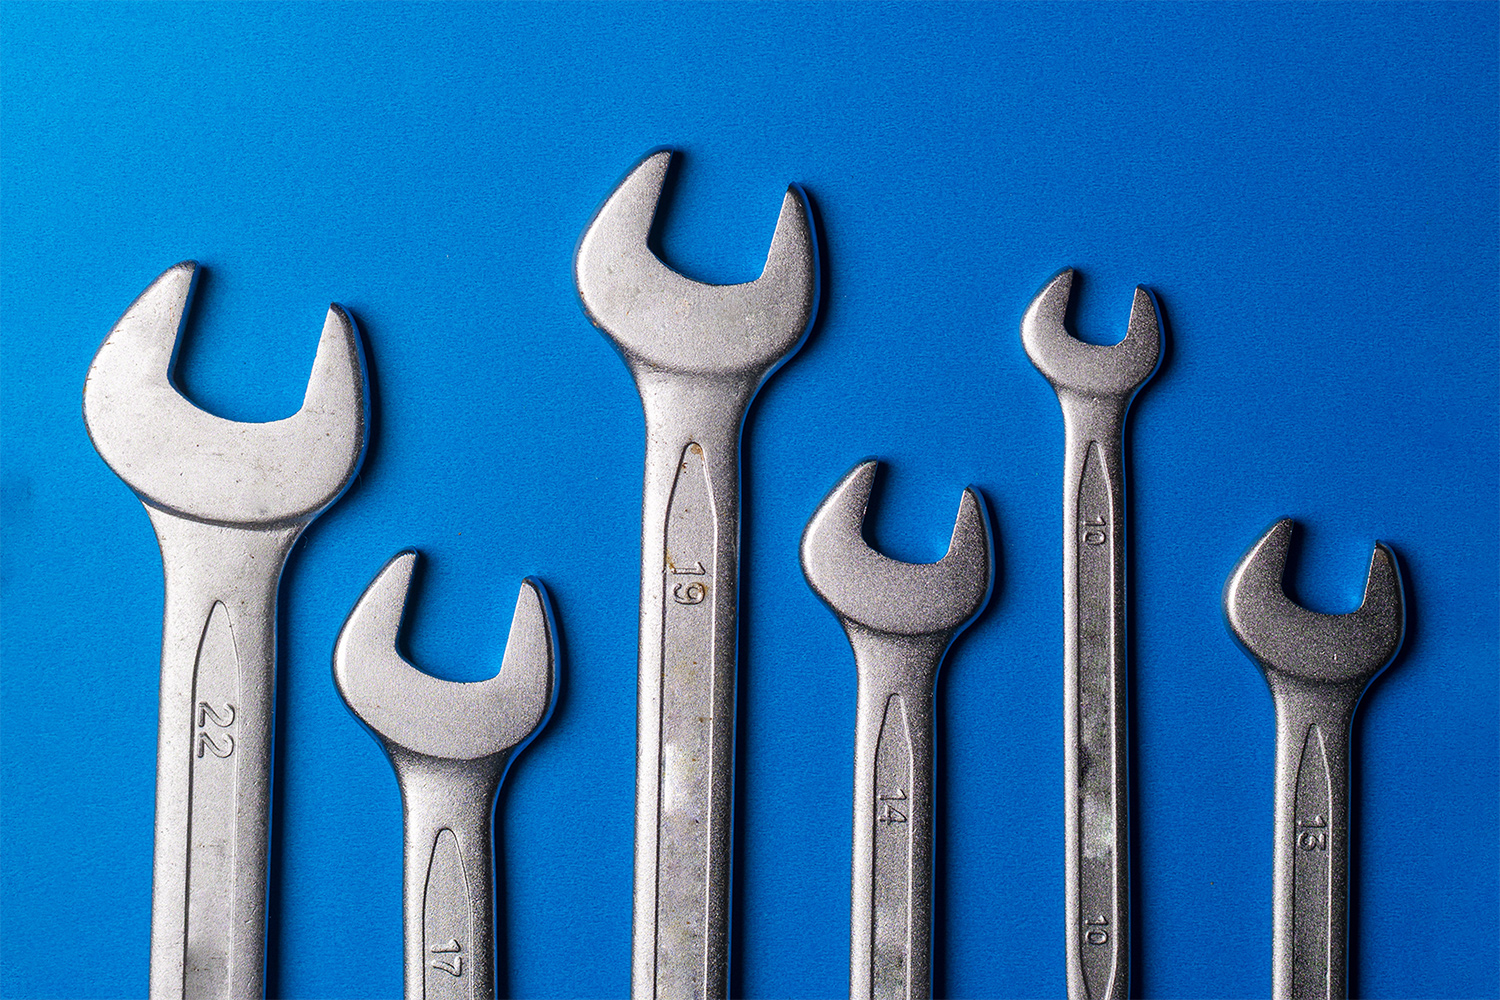 Choosing the right wrench: Different types of wrenches for DIY projects